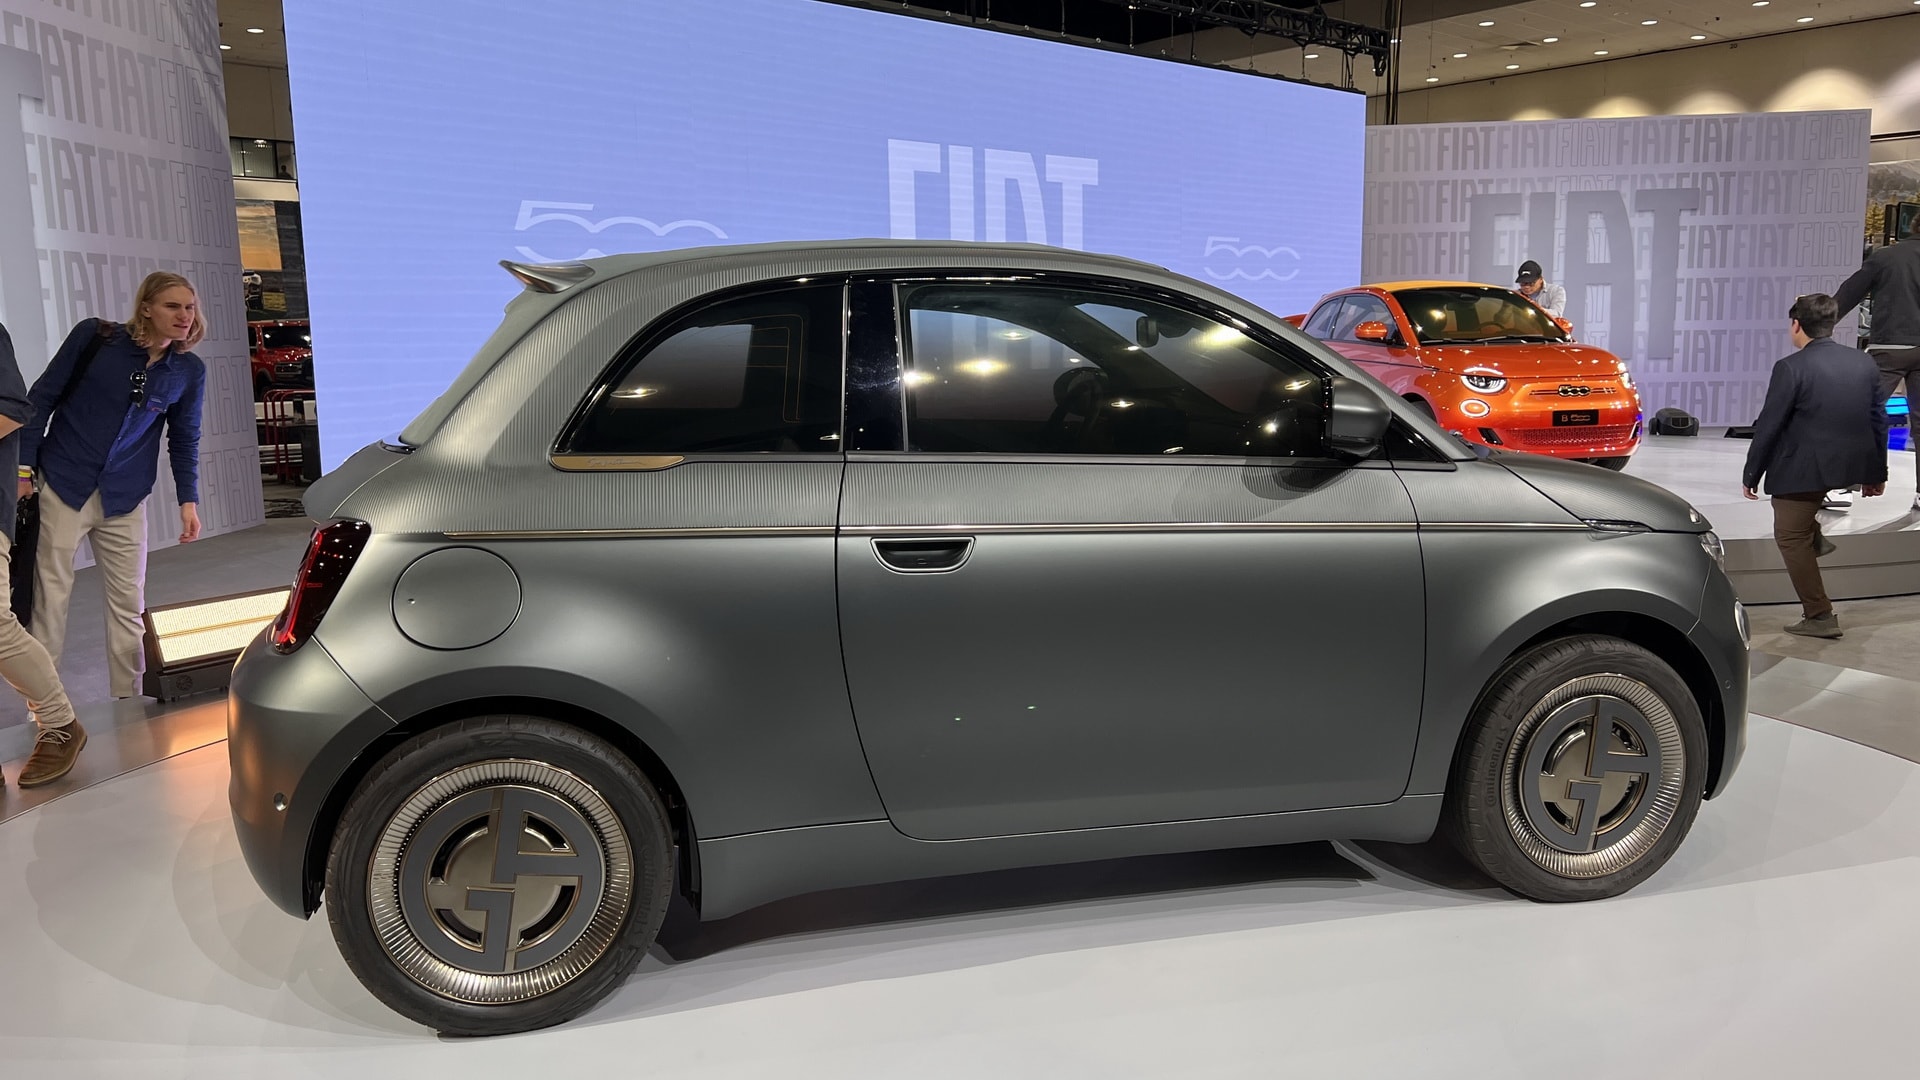 fiat unveils the new 500 3+1 — the all-electric iconic car now